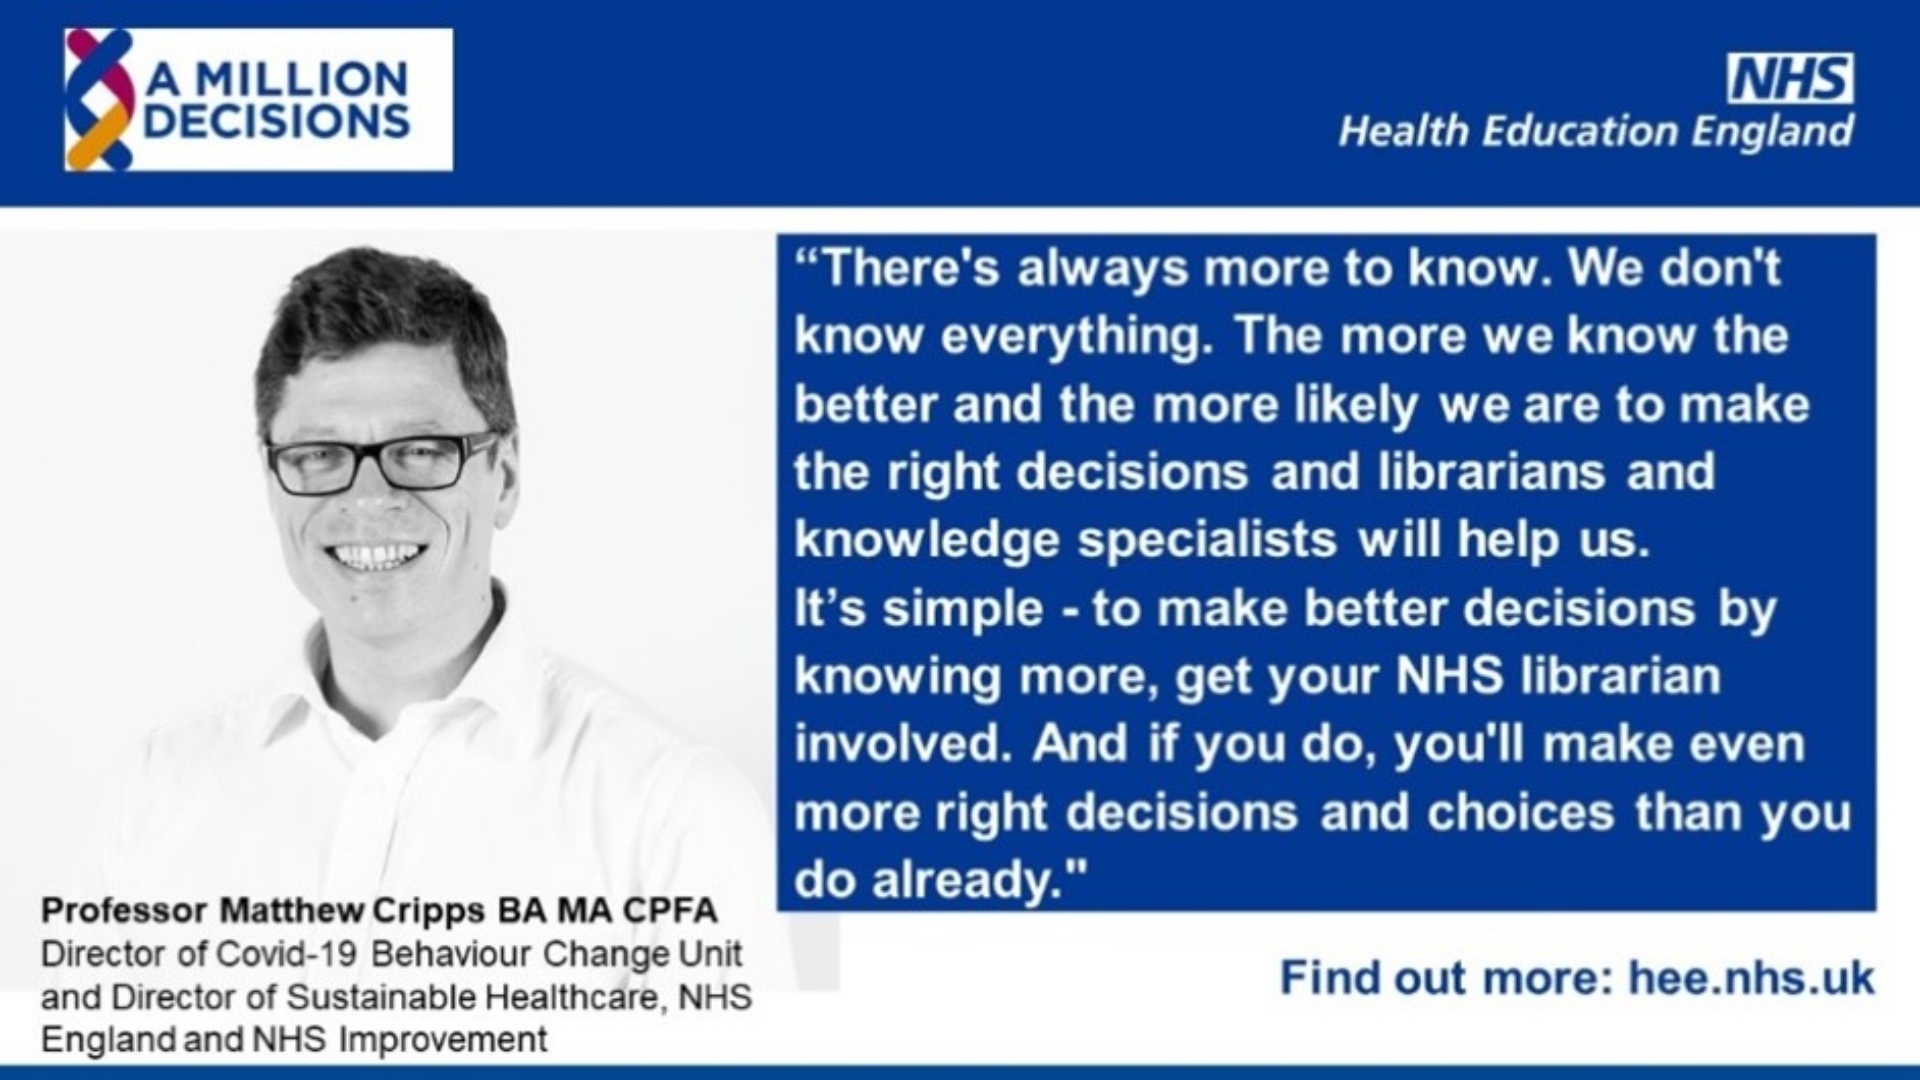 A black and white headshot of Matthew Cripps, Director of COVID-19 Behaviour Change Unit and Director of Sustainable Healthcare, NHS England and NHS Improvement. The quote says 